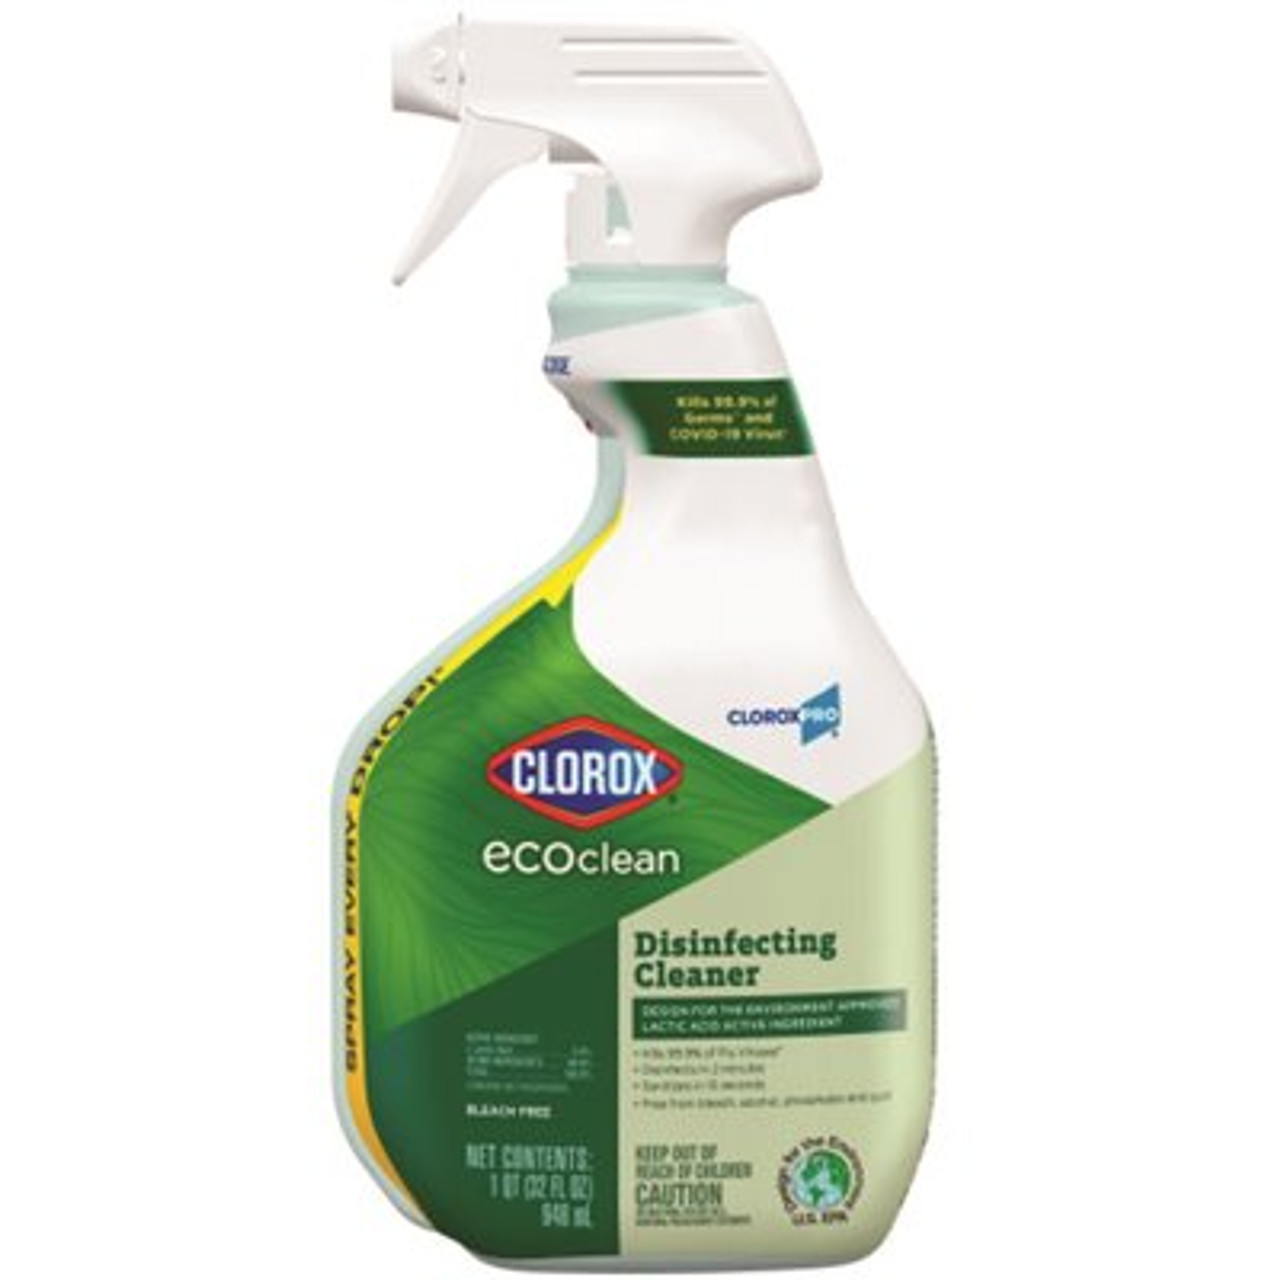 Ecoclean Disinfecting Cleaner Spray Bottle 32 Oz Case Of 9